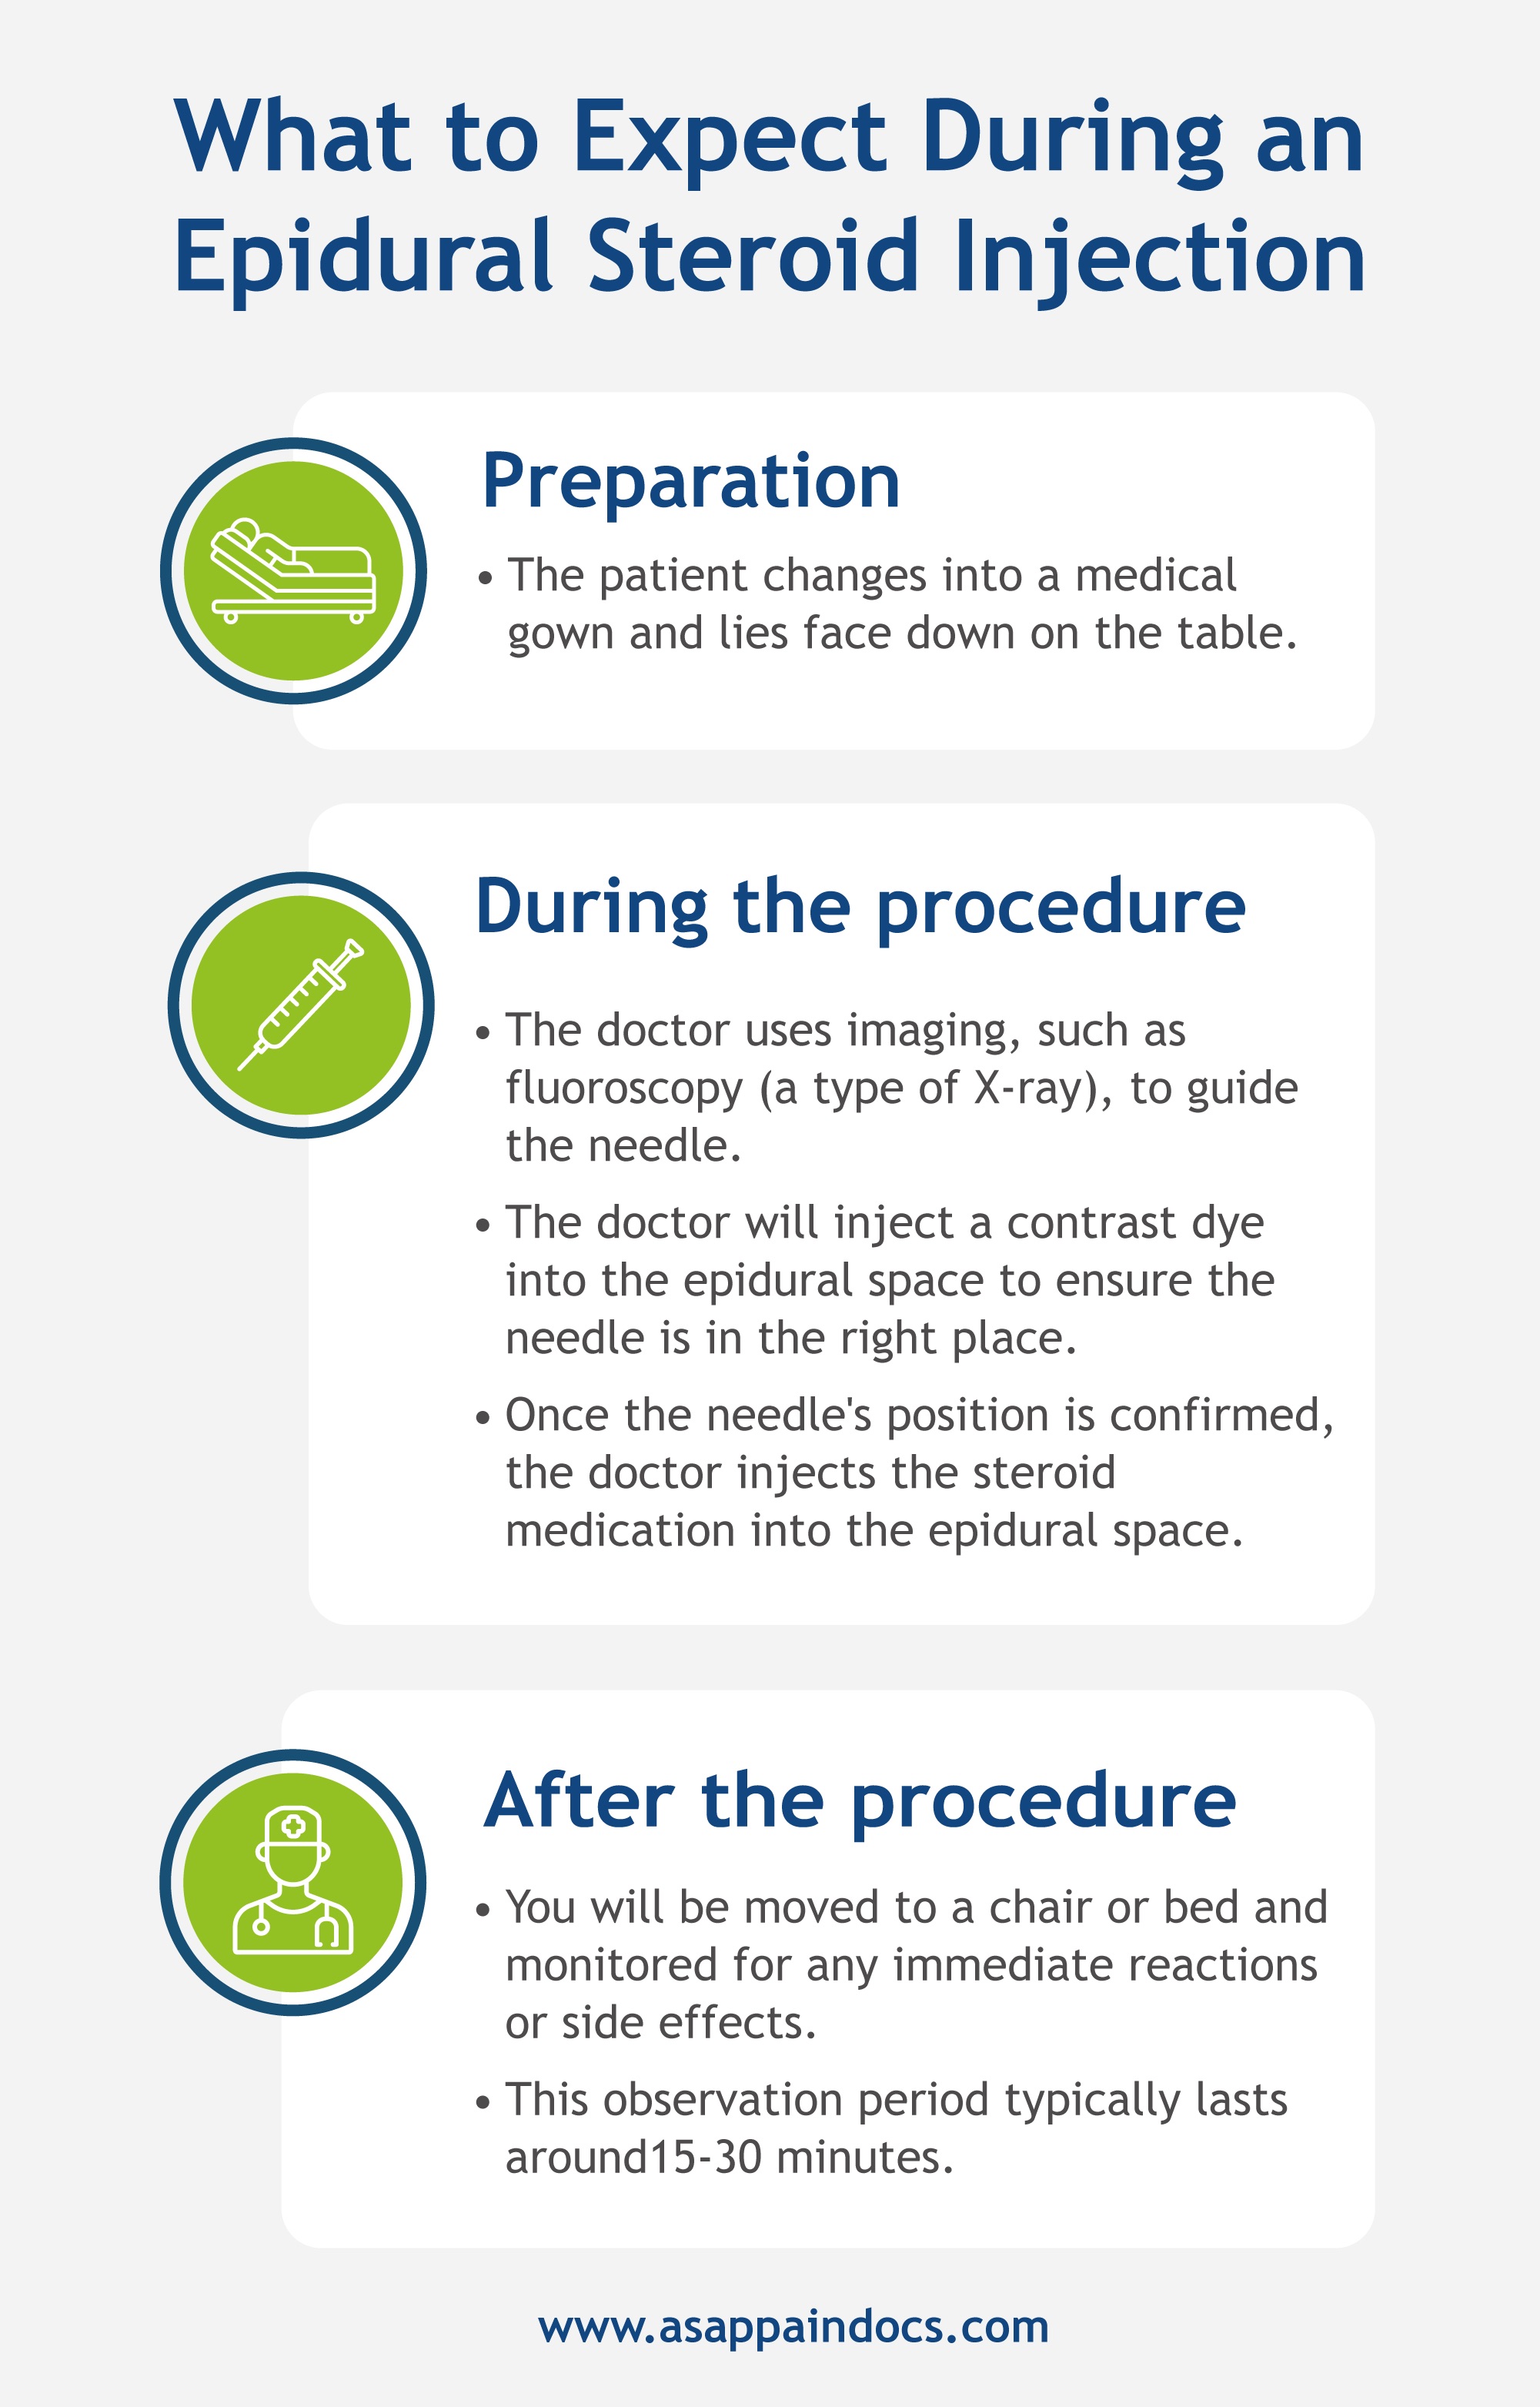 An infographic describing what to expect during an epidural steroid injection procedure.